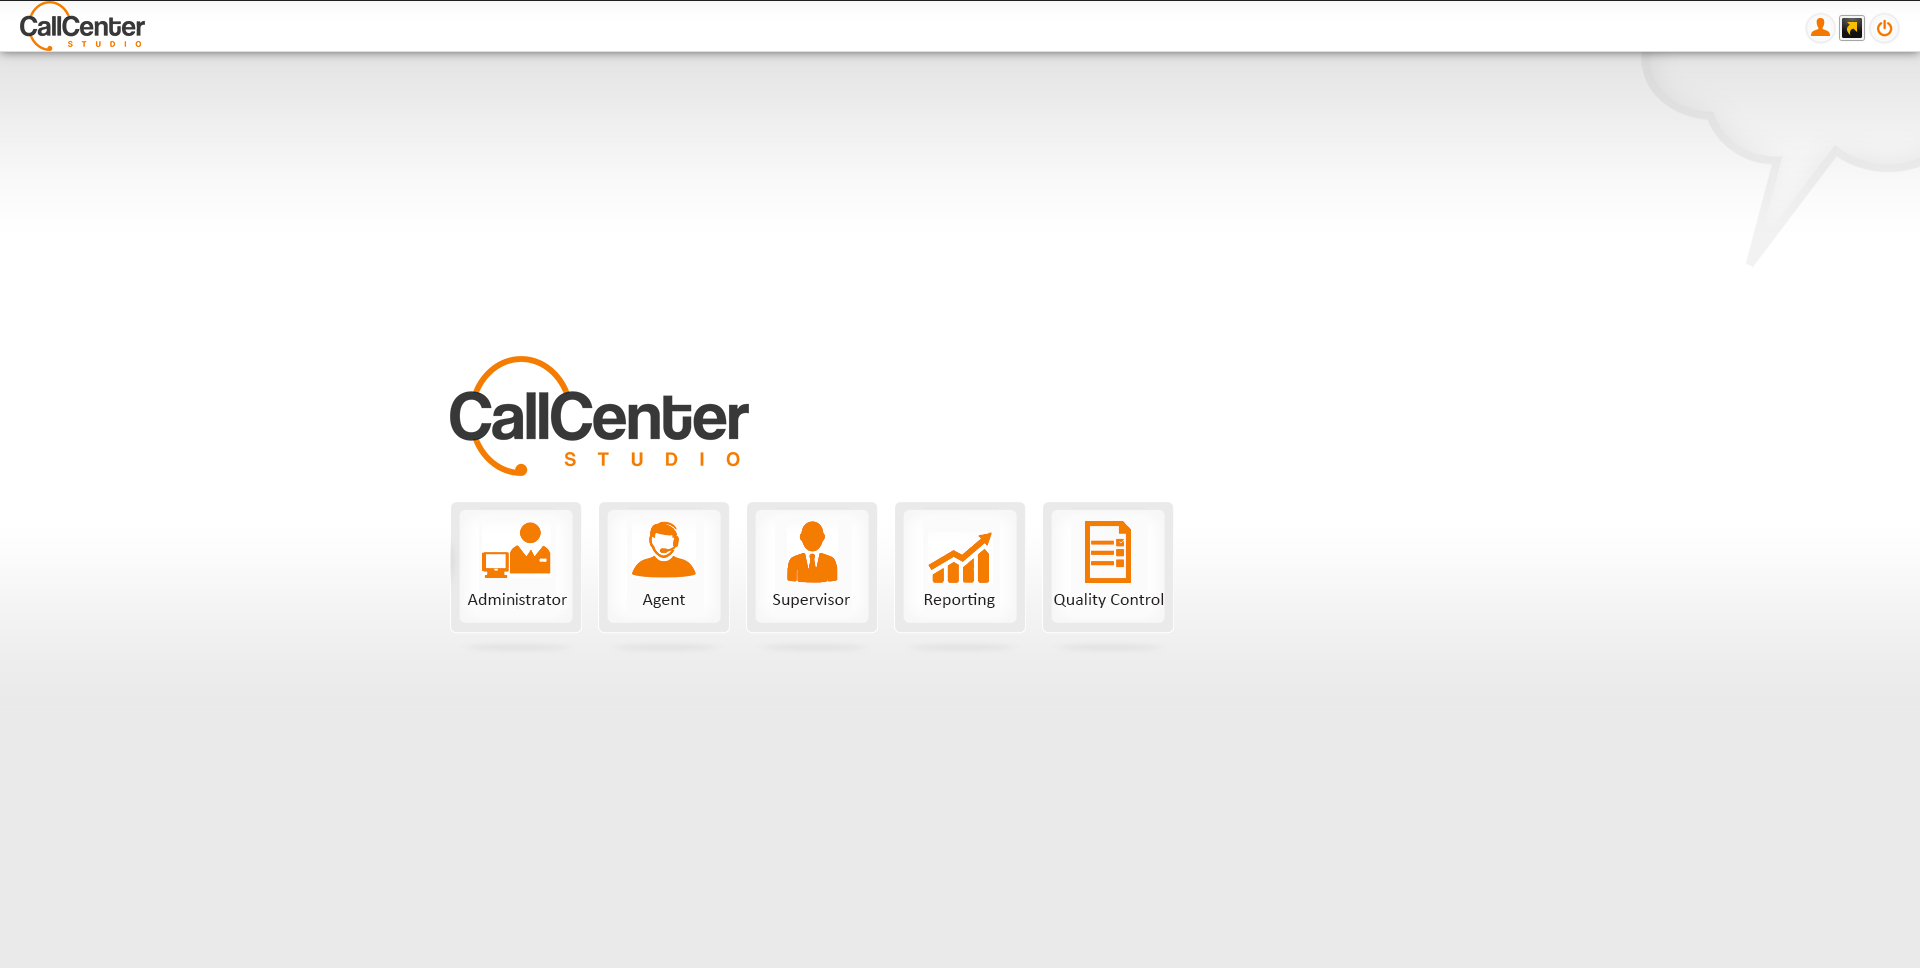 Call Center Studio Software - All the functions of the product is accessible through the permission-based main menu items